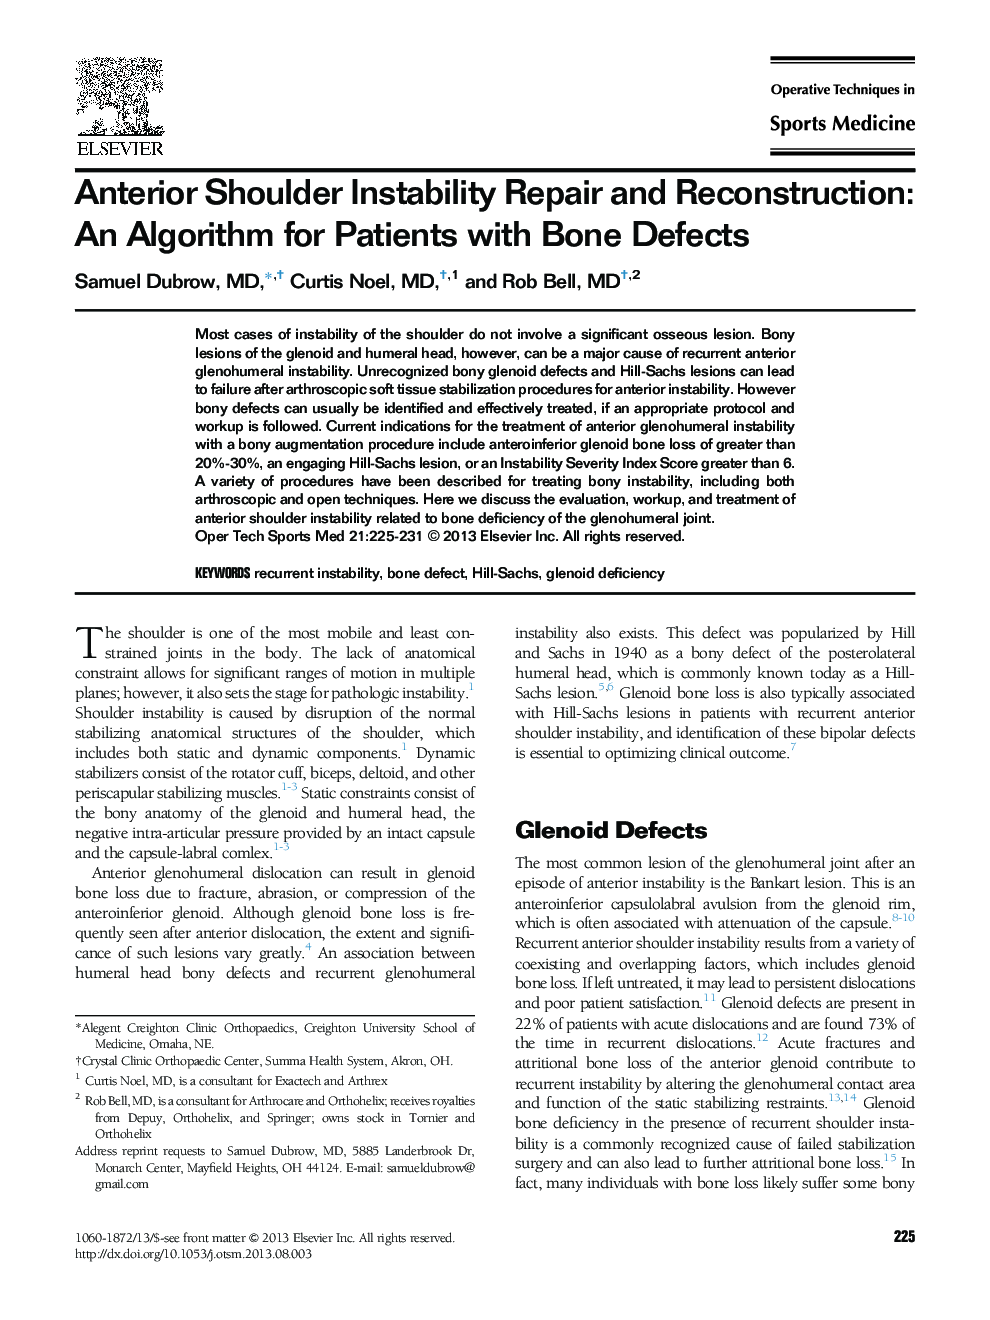 Anterior Shoulder Instability Repair and Reconstruction: An Algorithm for Patients with Bone Defects